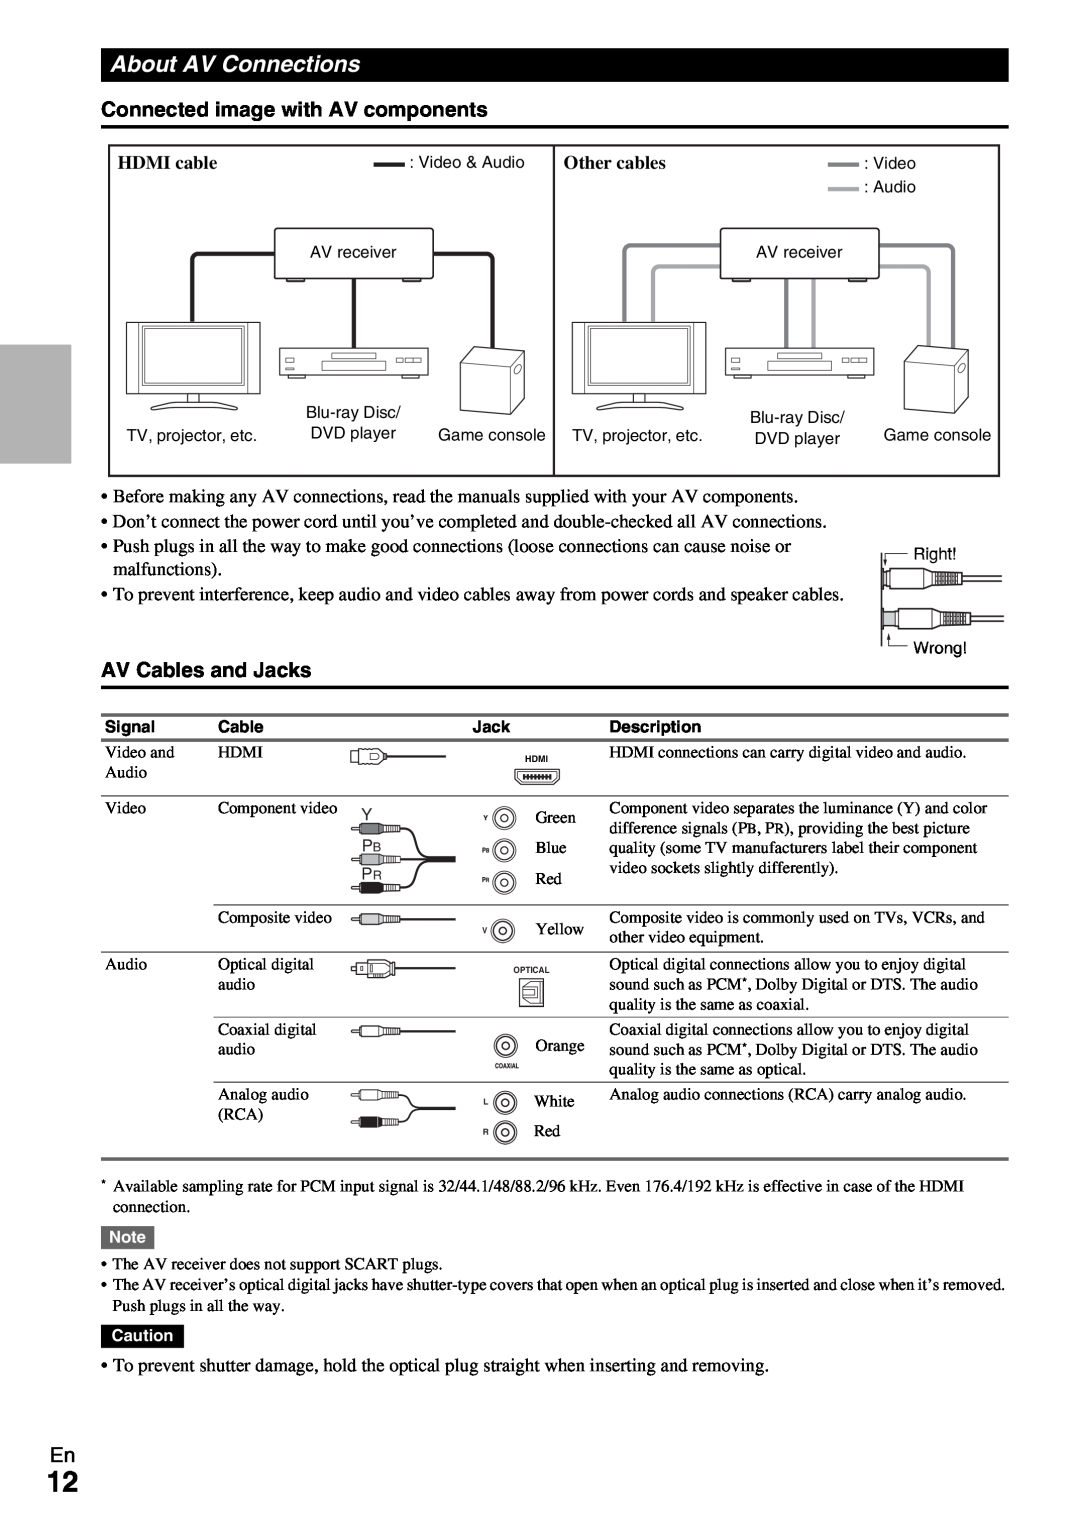 Onkyo HT-RC330 instruction manual About AV Connections, Connected image with AV components, AV Cables and Jacks 